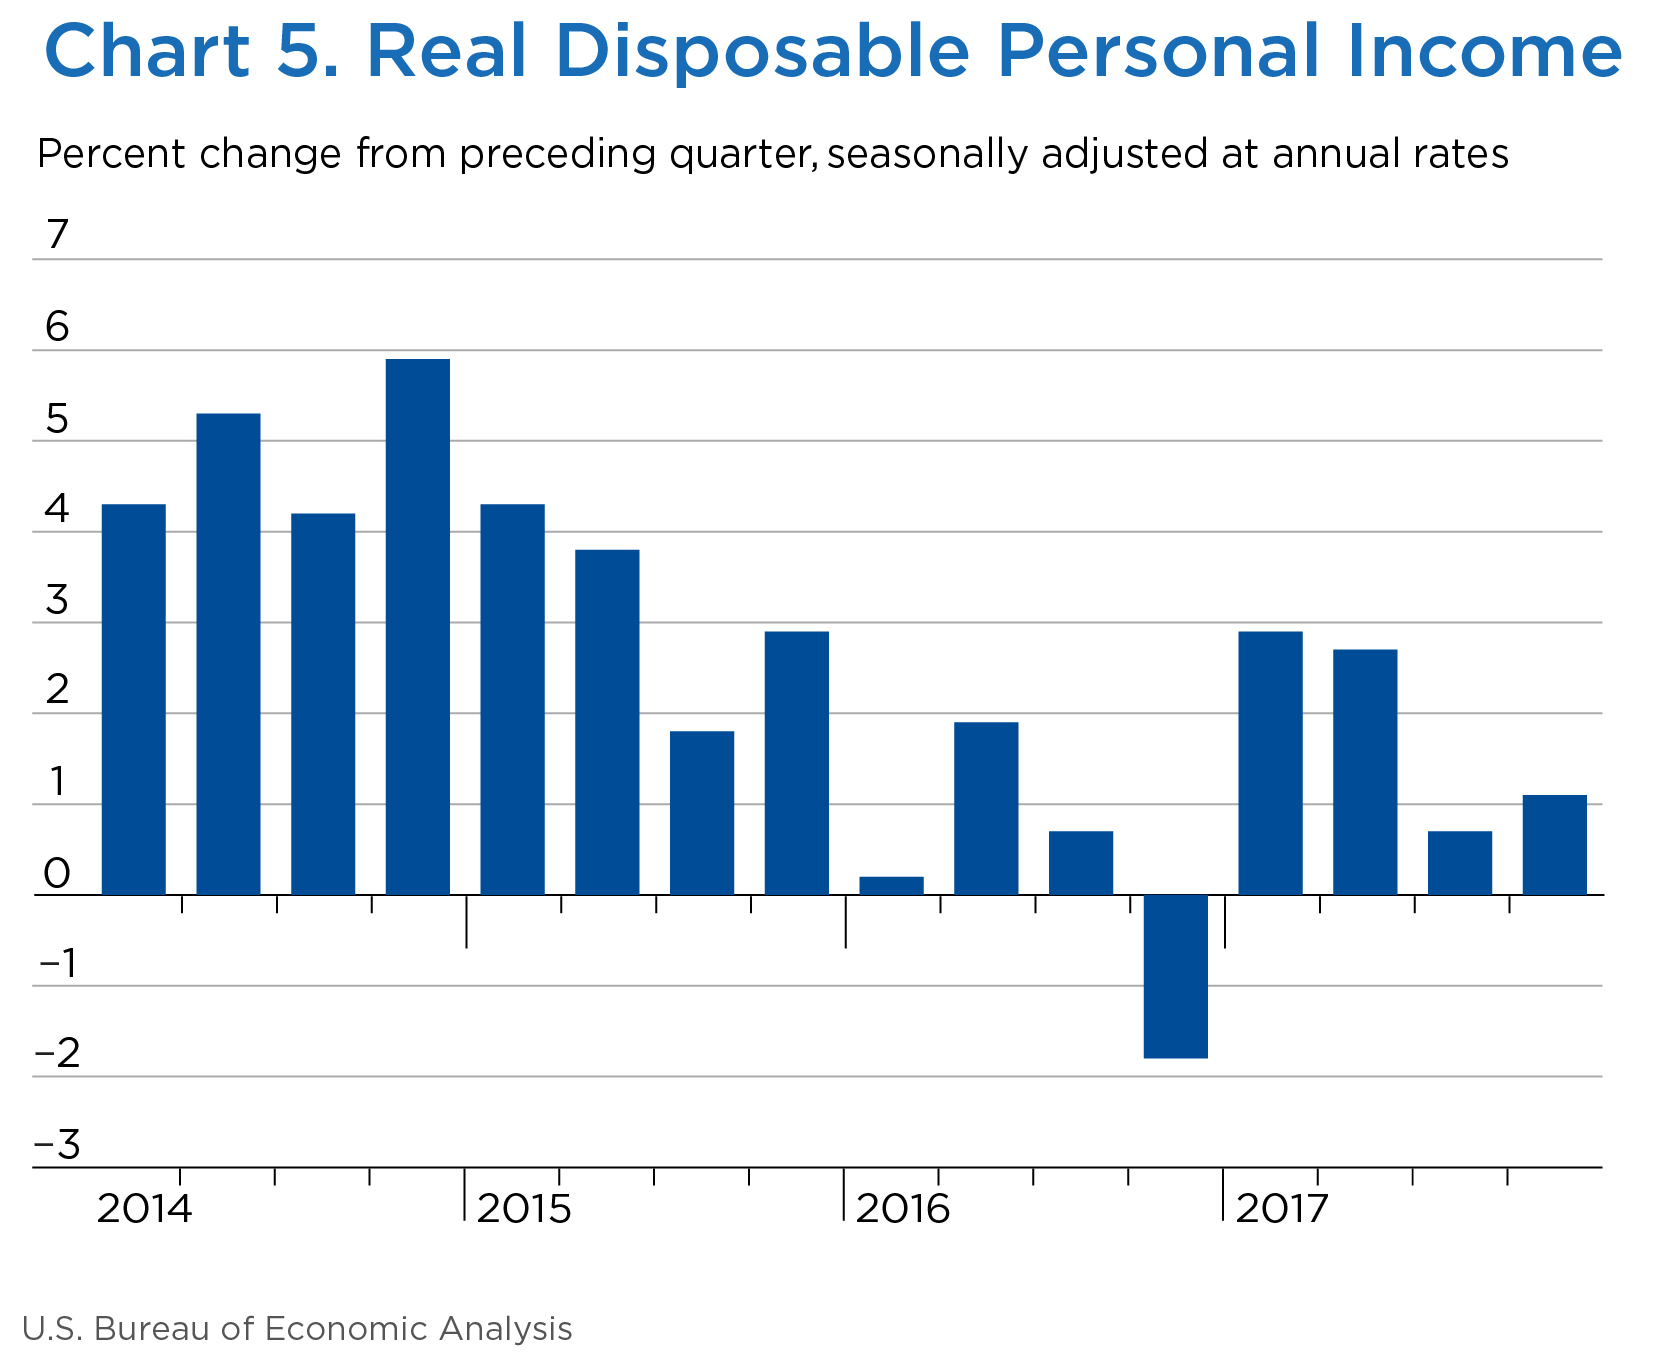 Chart 5. Real Disposable Personal Income, Bar Chart